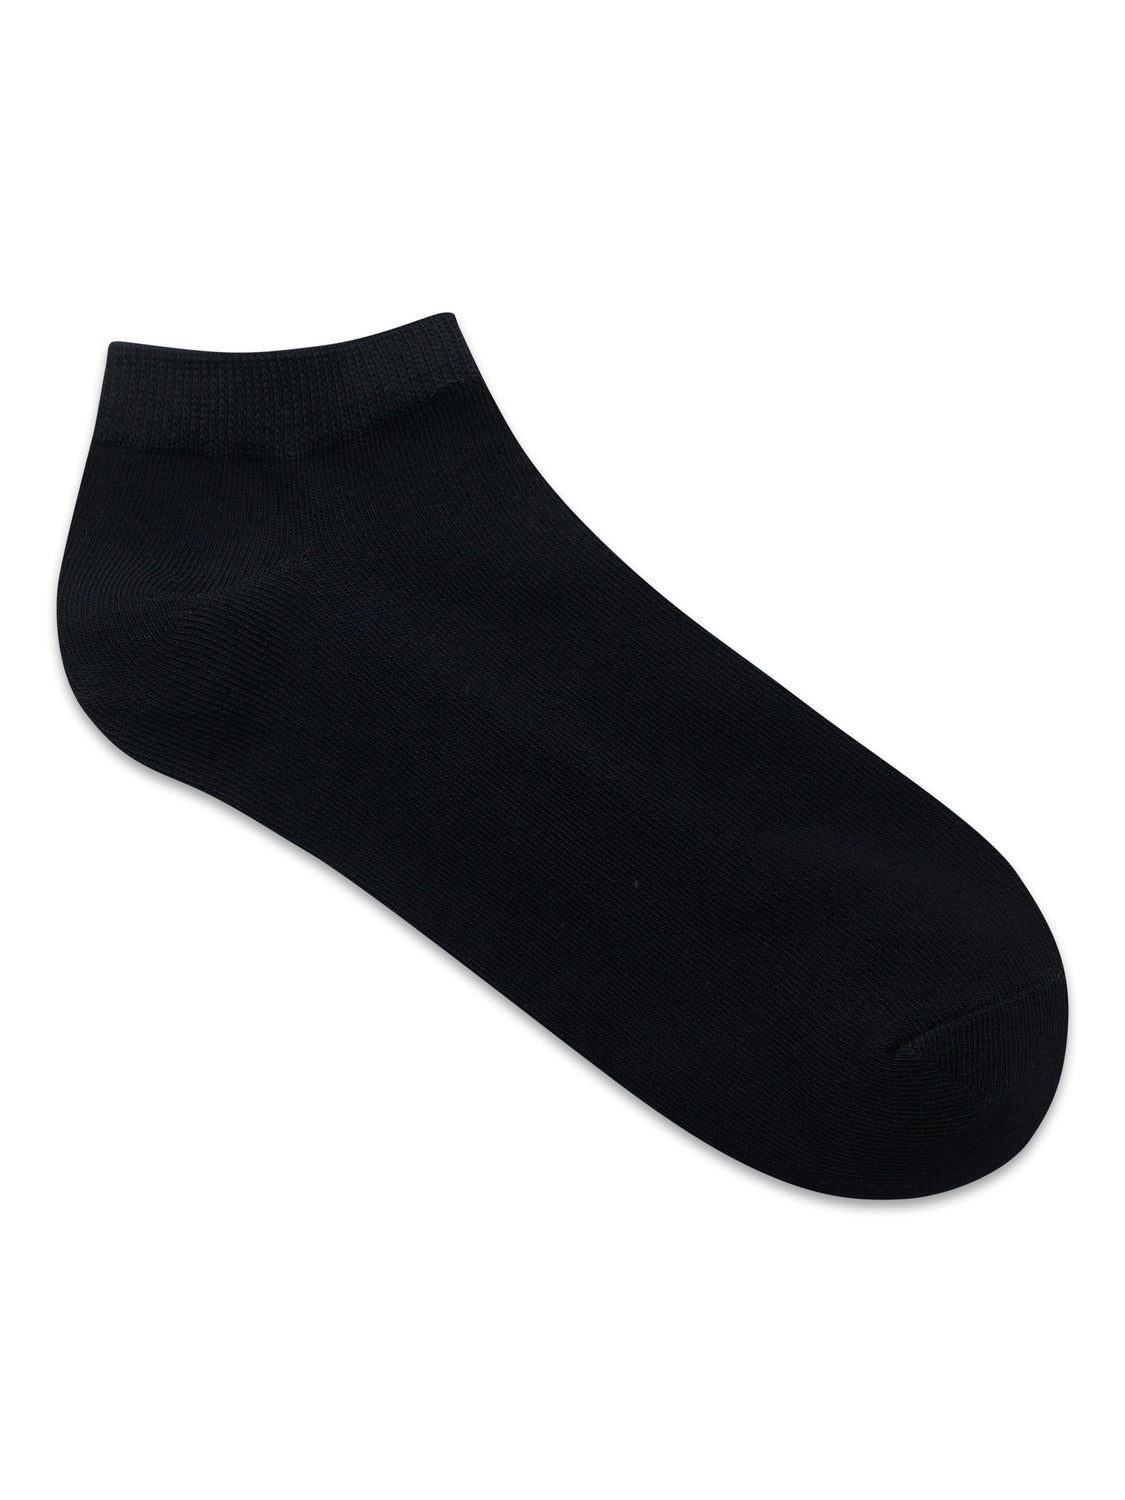 PACK 7 CALCETINES BASIC - GRIS